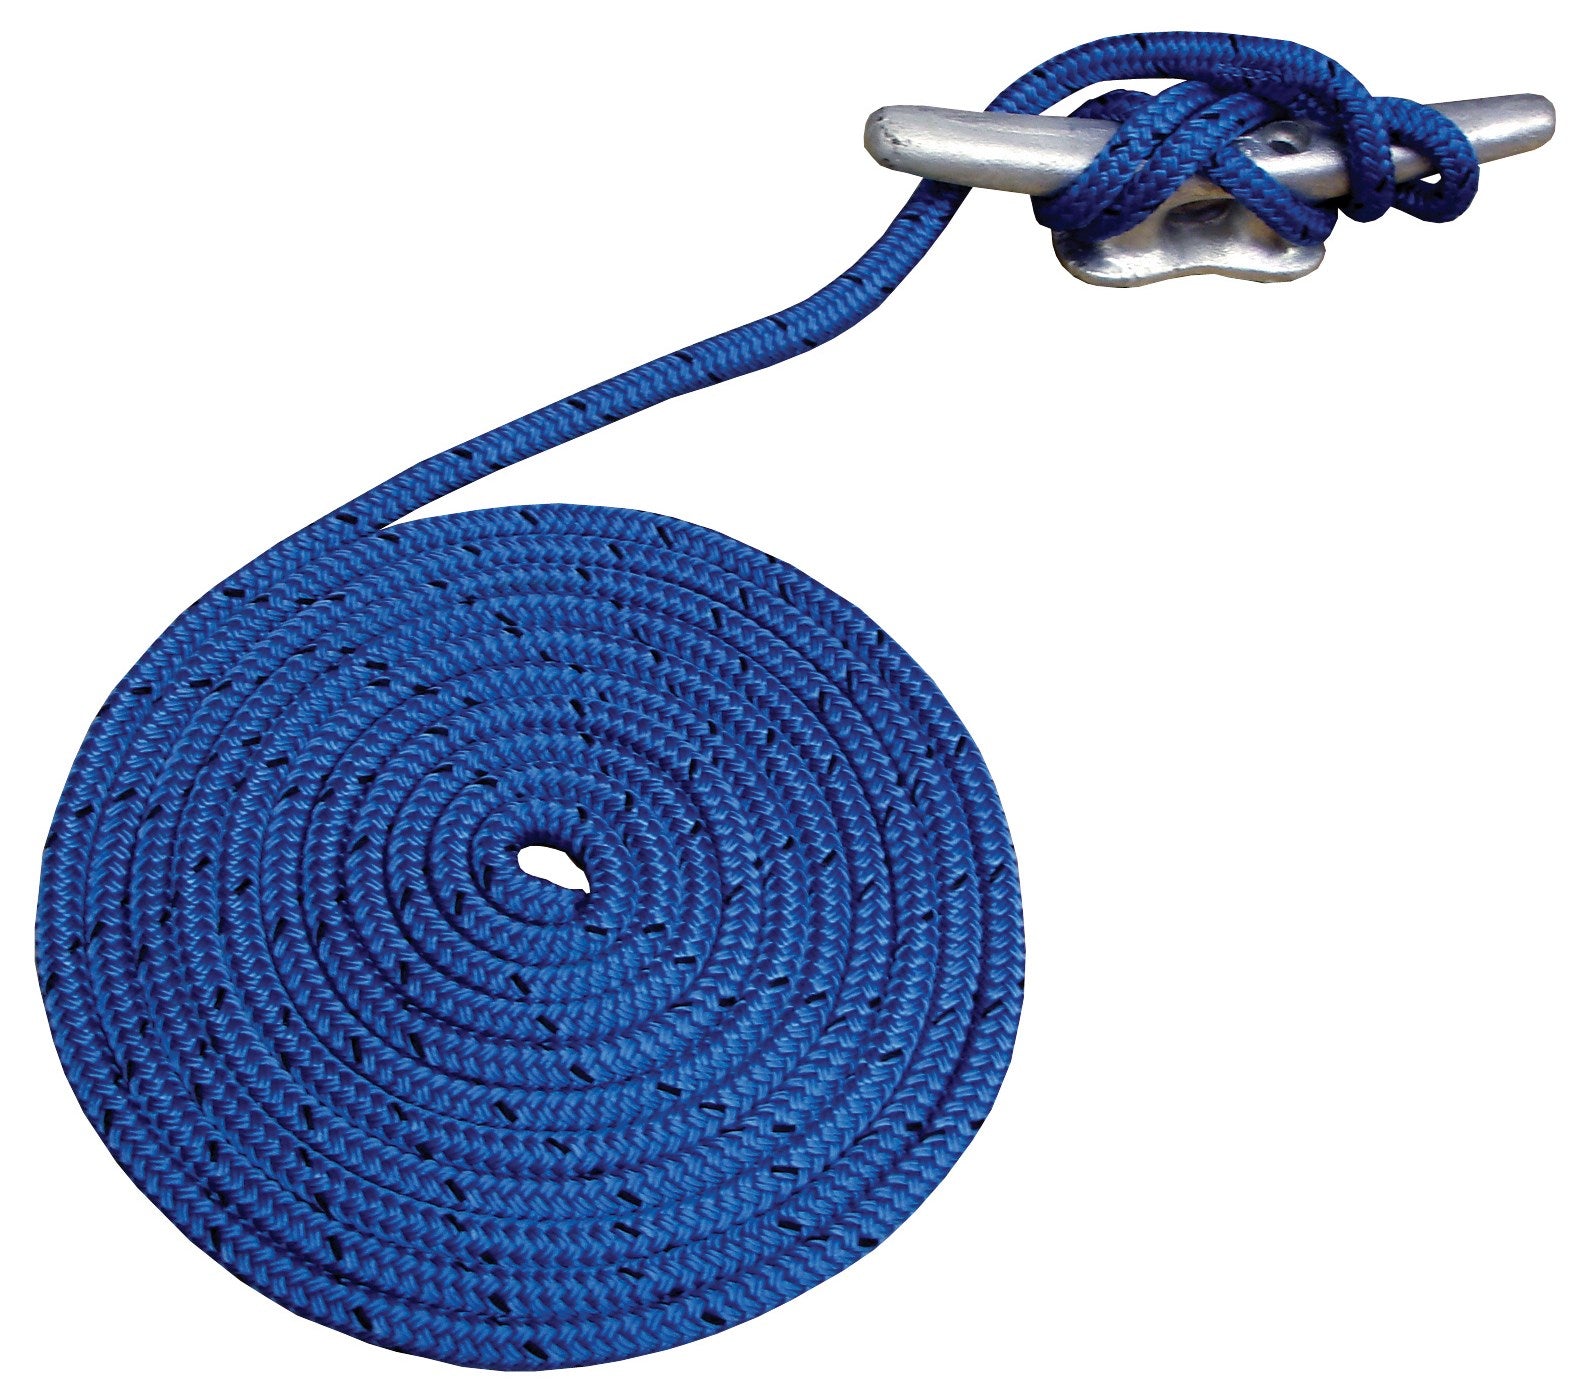 Attwood, Attwood 11702-7 3/8" X 15' Blue Double Braided MFP Dock Line